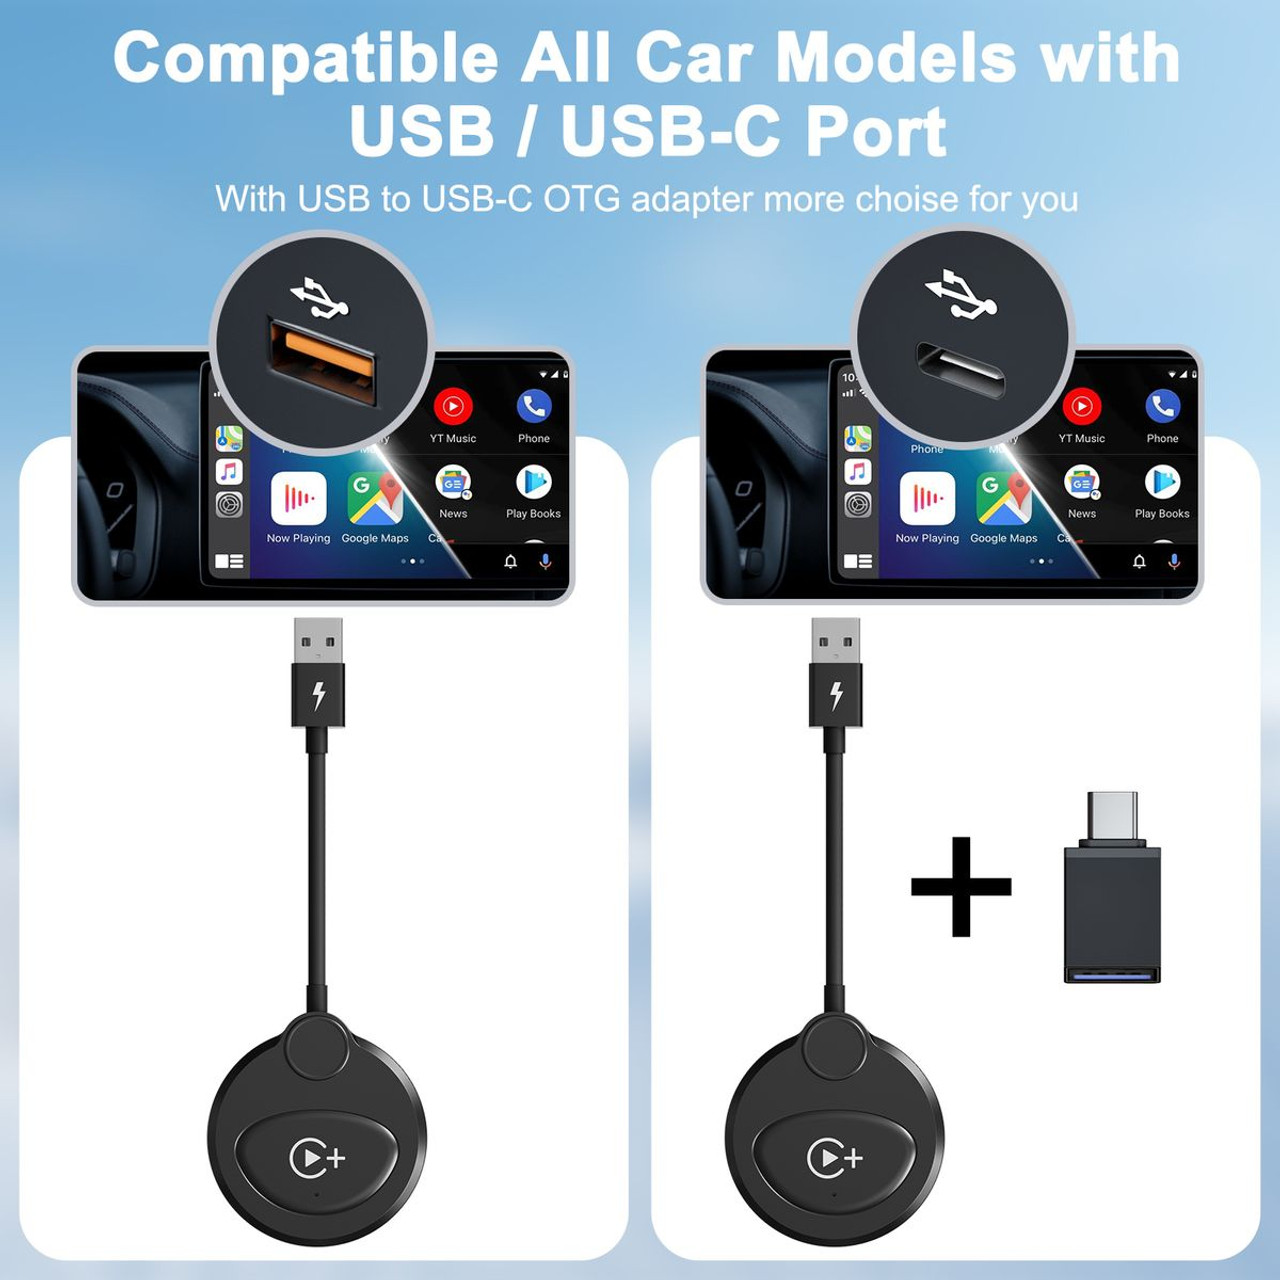 Wireless CarPlay Adapter for Wired CarPlay Upgrade Plug Play Wireless CarPlay Dongle Converts Wired to Wireless Fast and Easy Use Fit for iPhone iOS 12+ Color Black product image